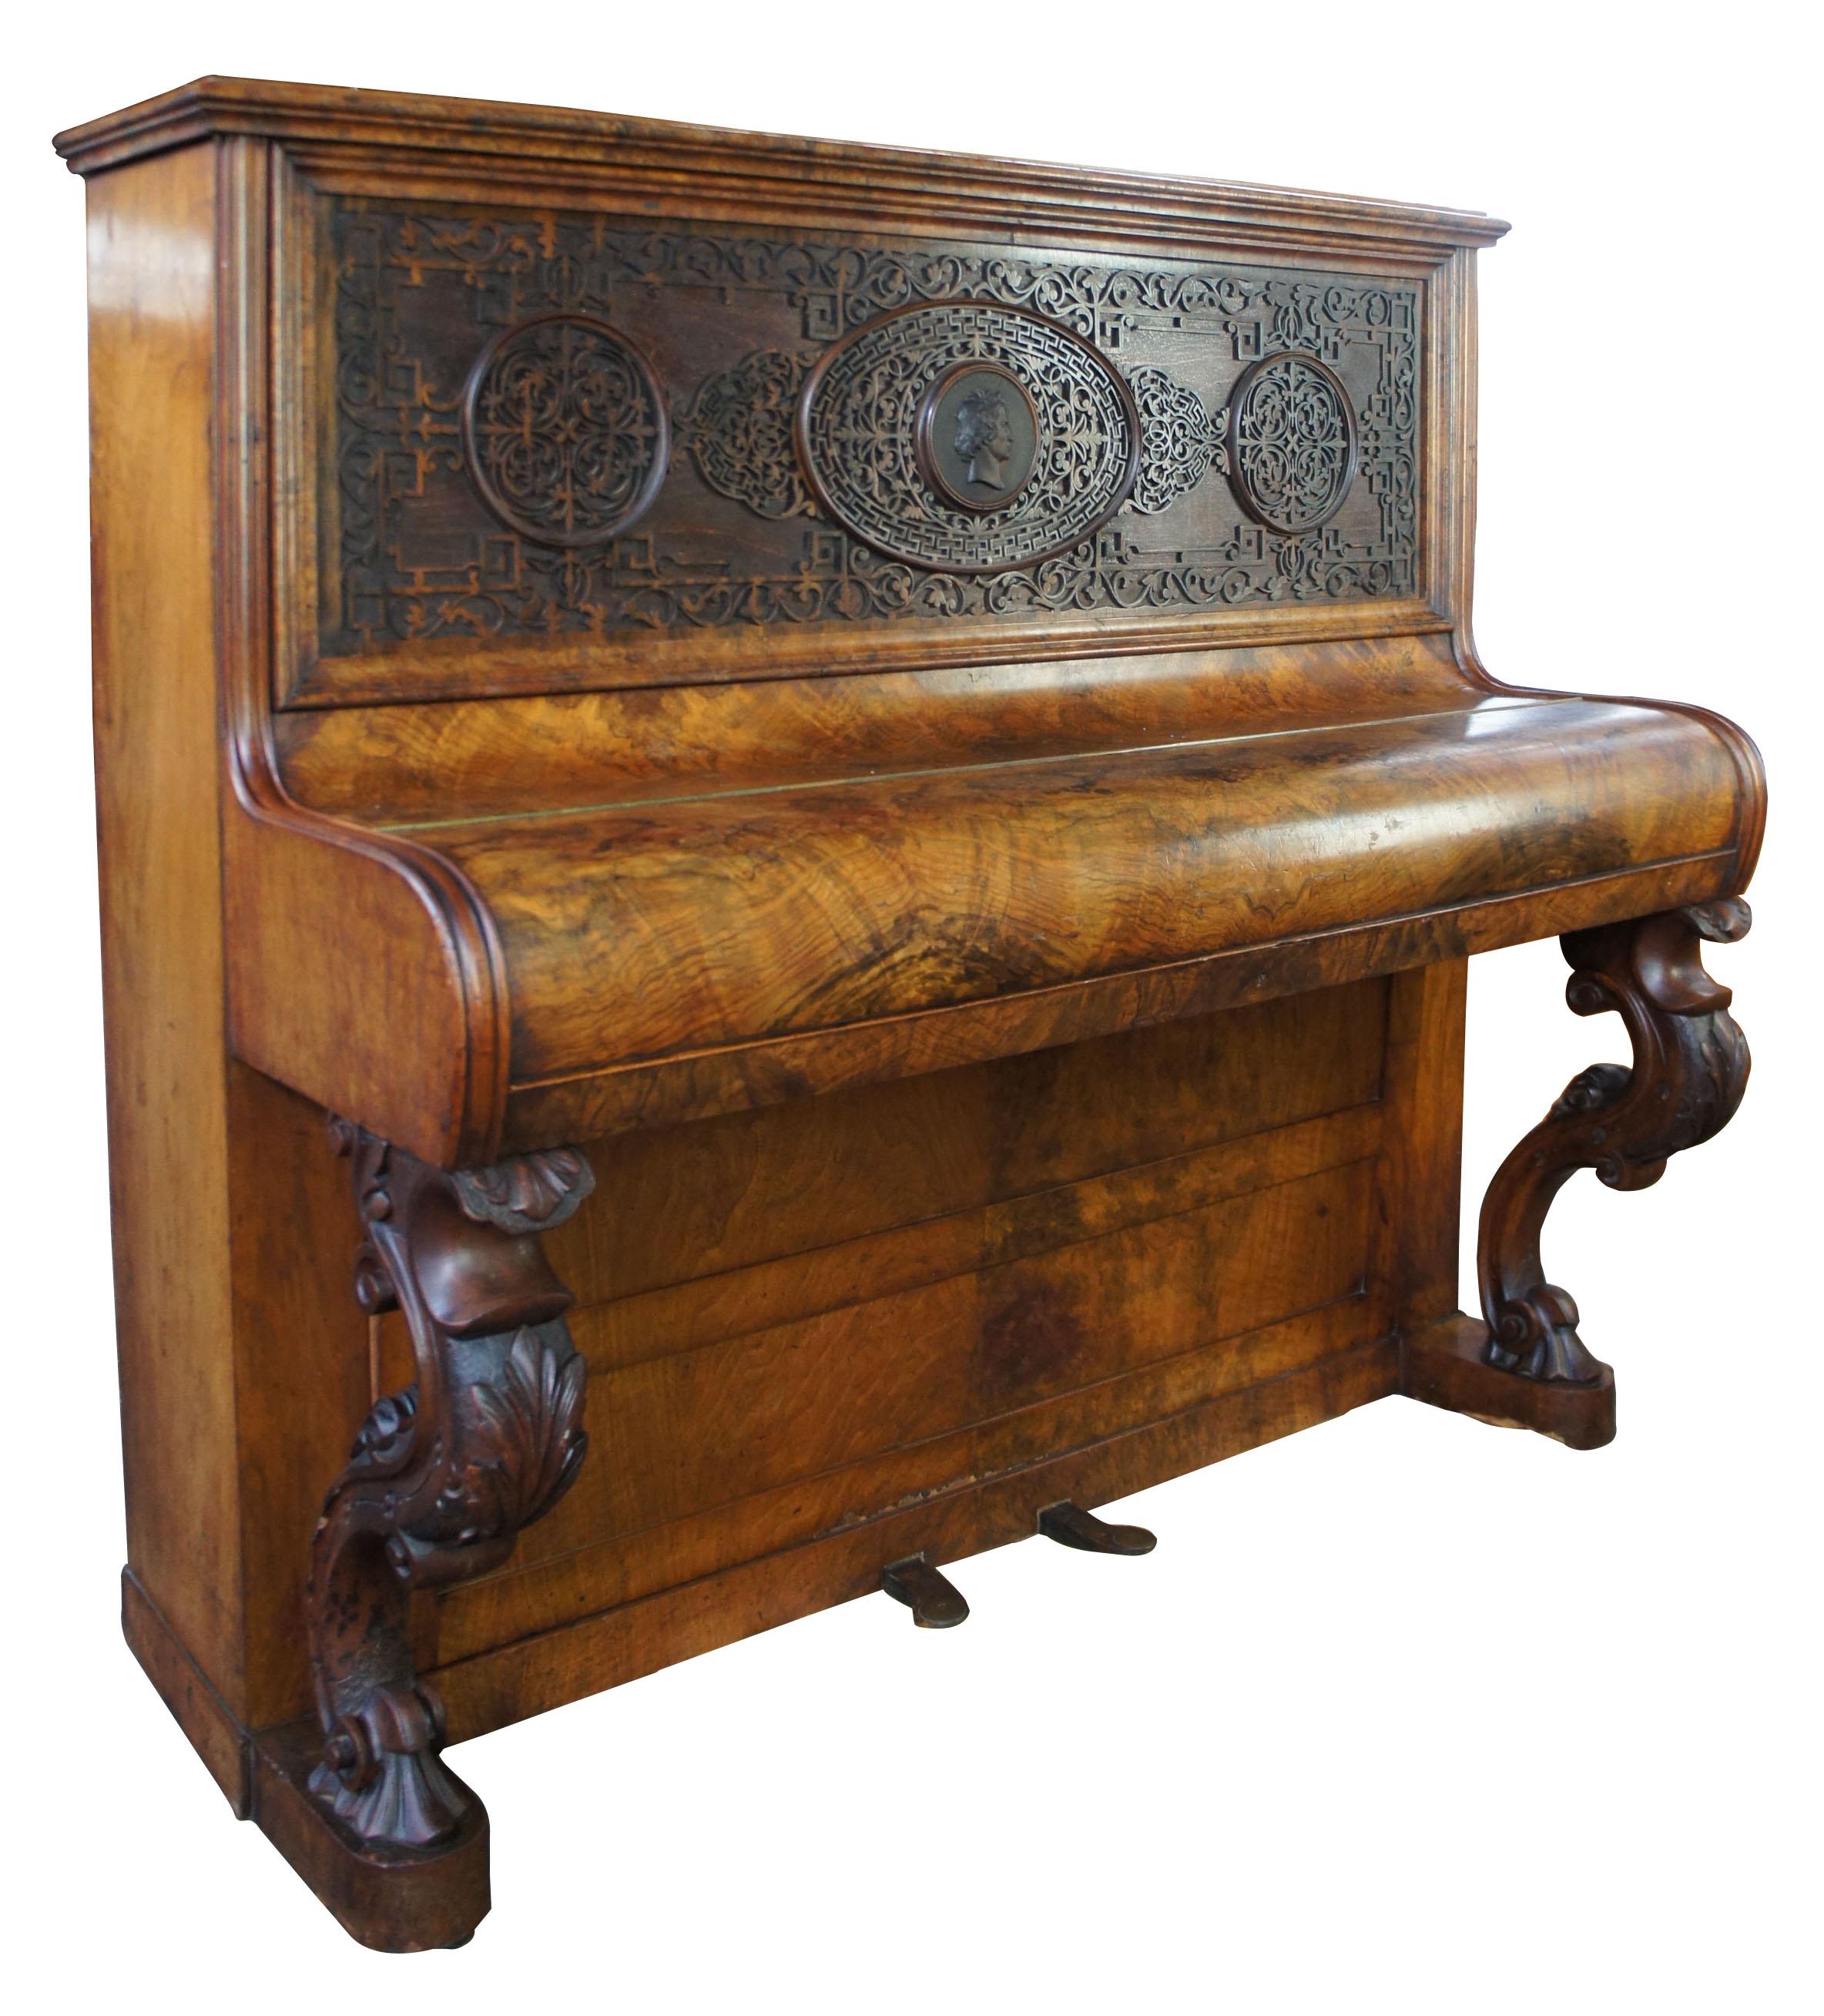 Victorian walnut burr upright piano Beethoven Medallion Fretwork James Dace, 1890

A gorgeous Victorian upright piano. Features a walnut burr case and ornate fretwork front panel with a Beethoven carved medallion along the center. Legs are